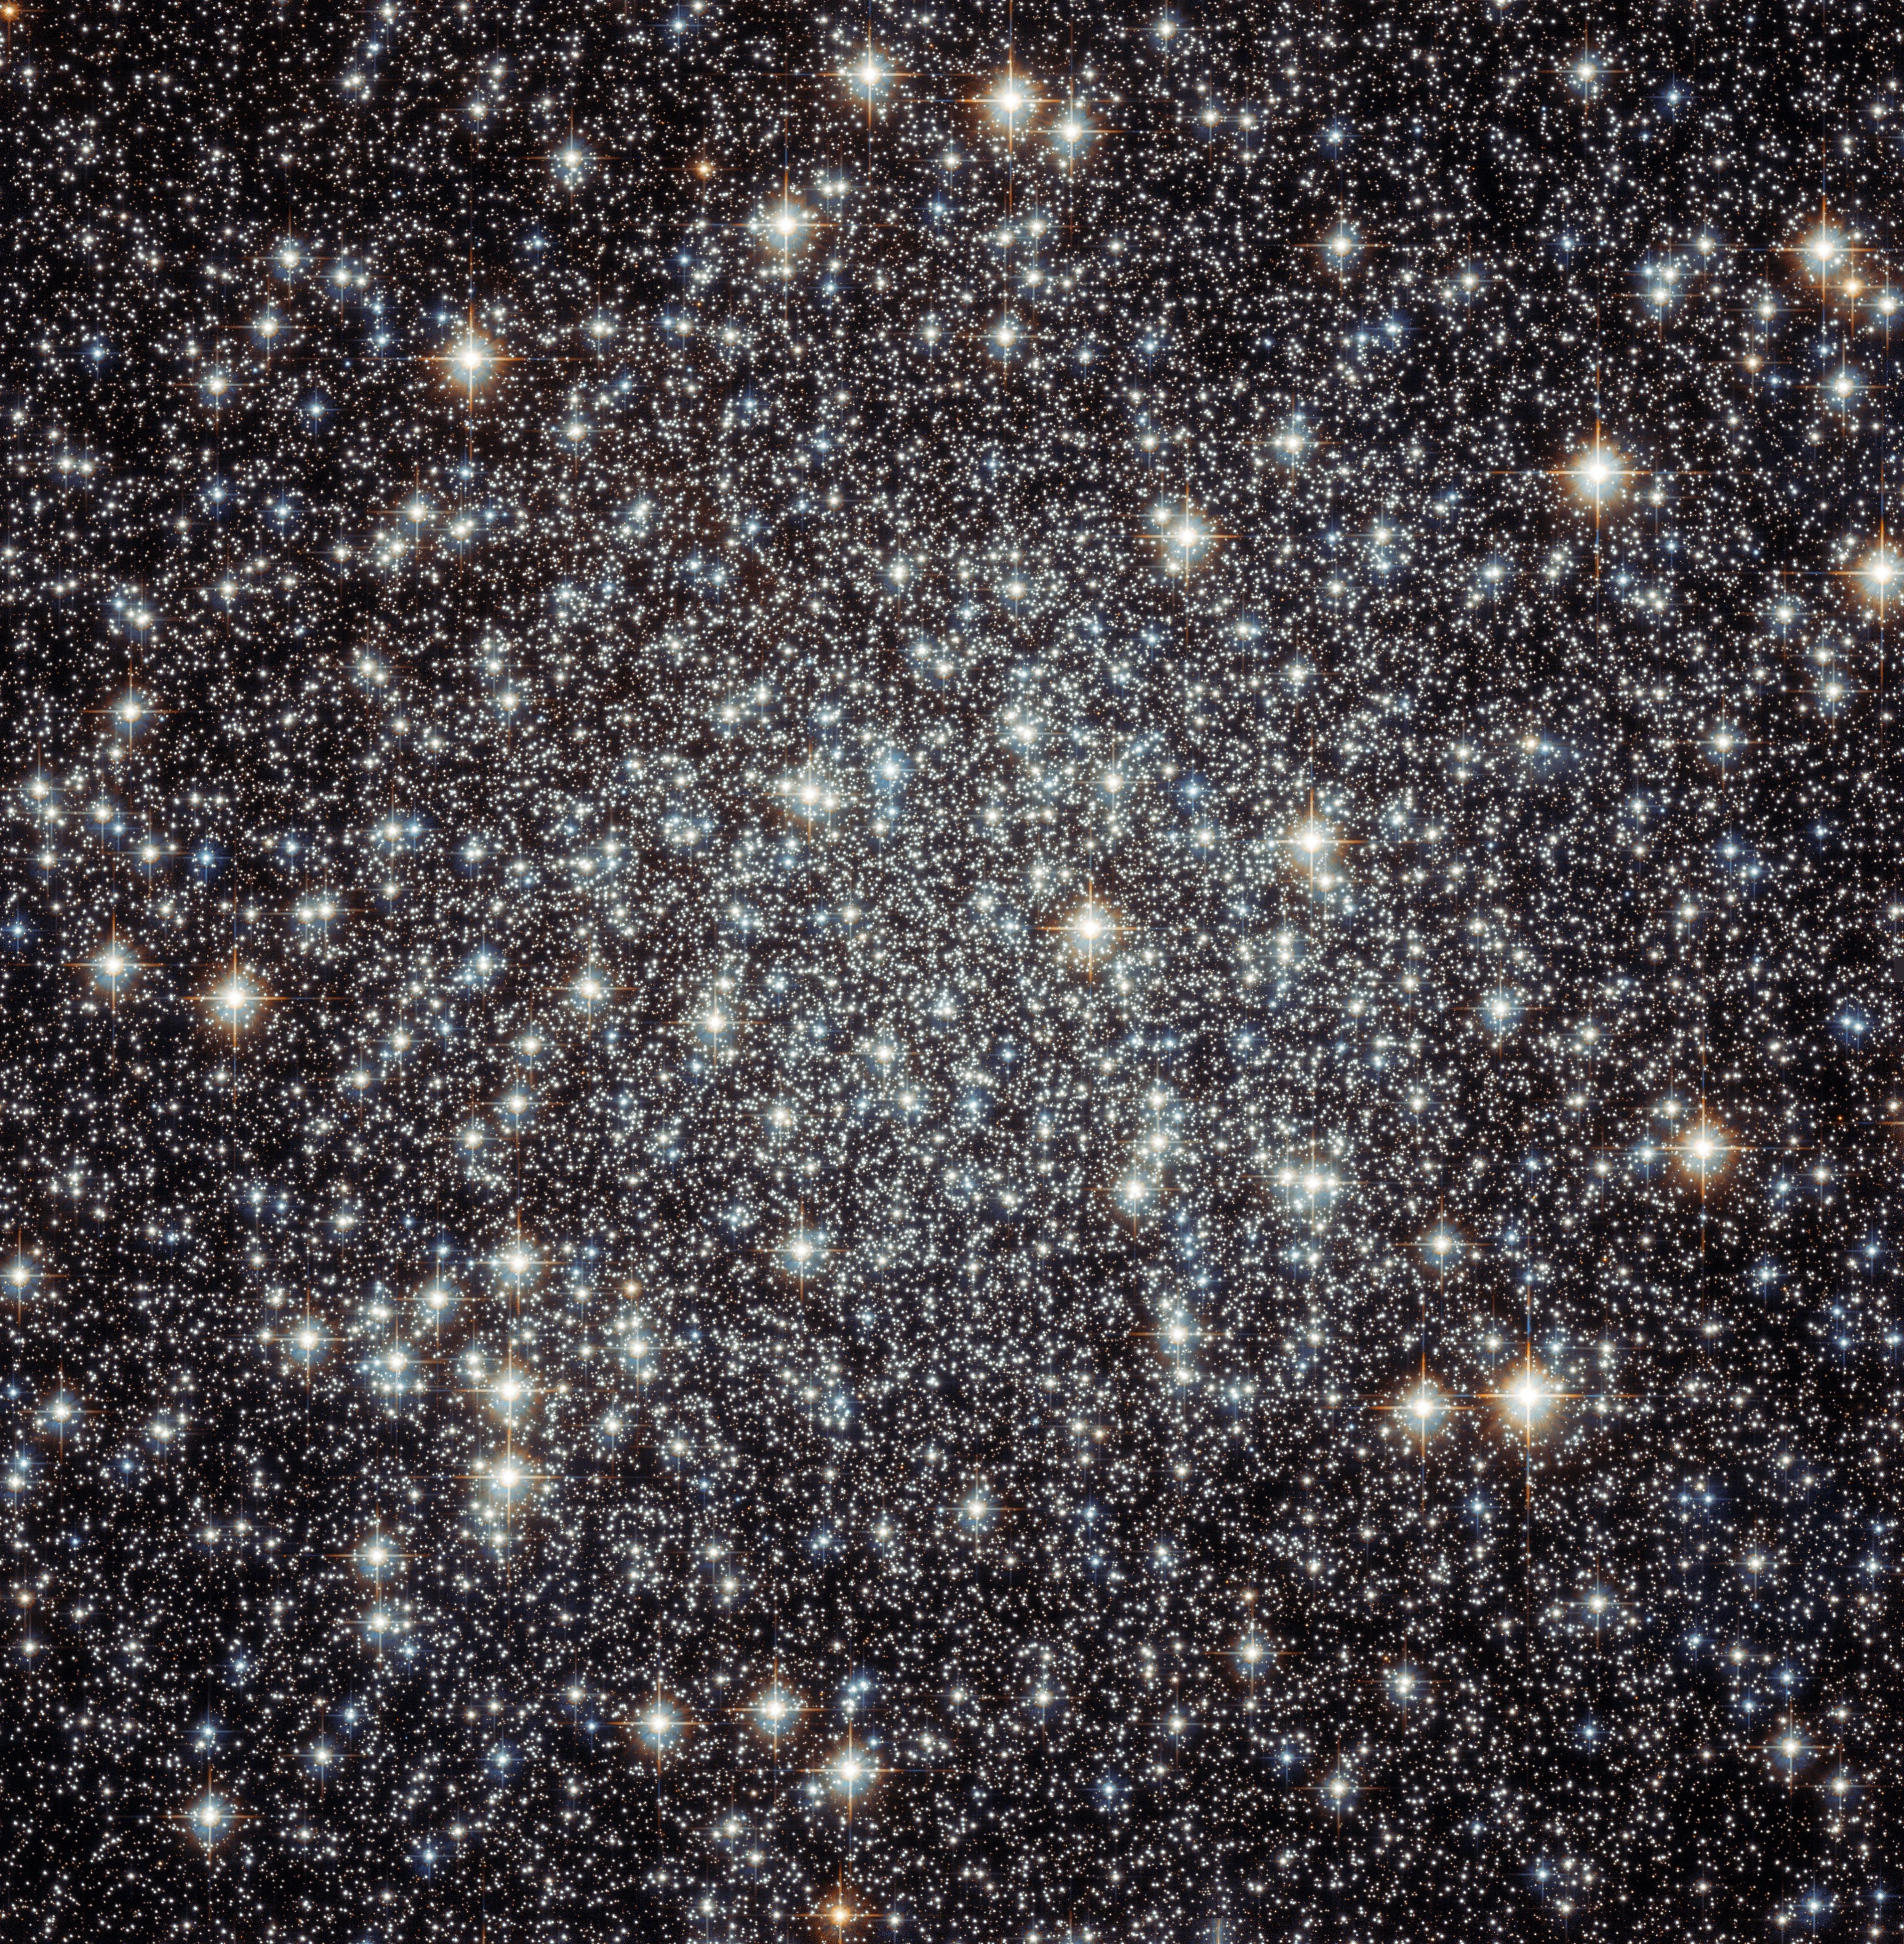 The center of globular cluster M22 with its thousands of stars.